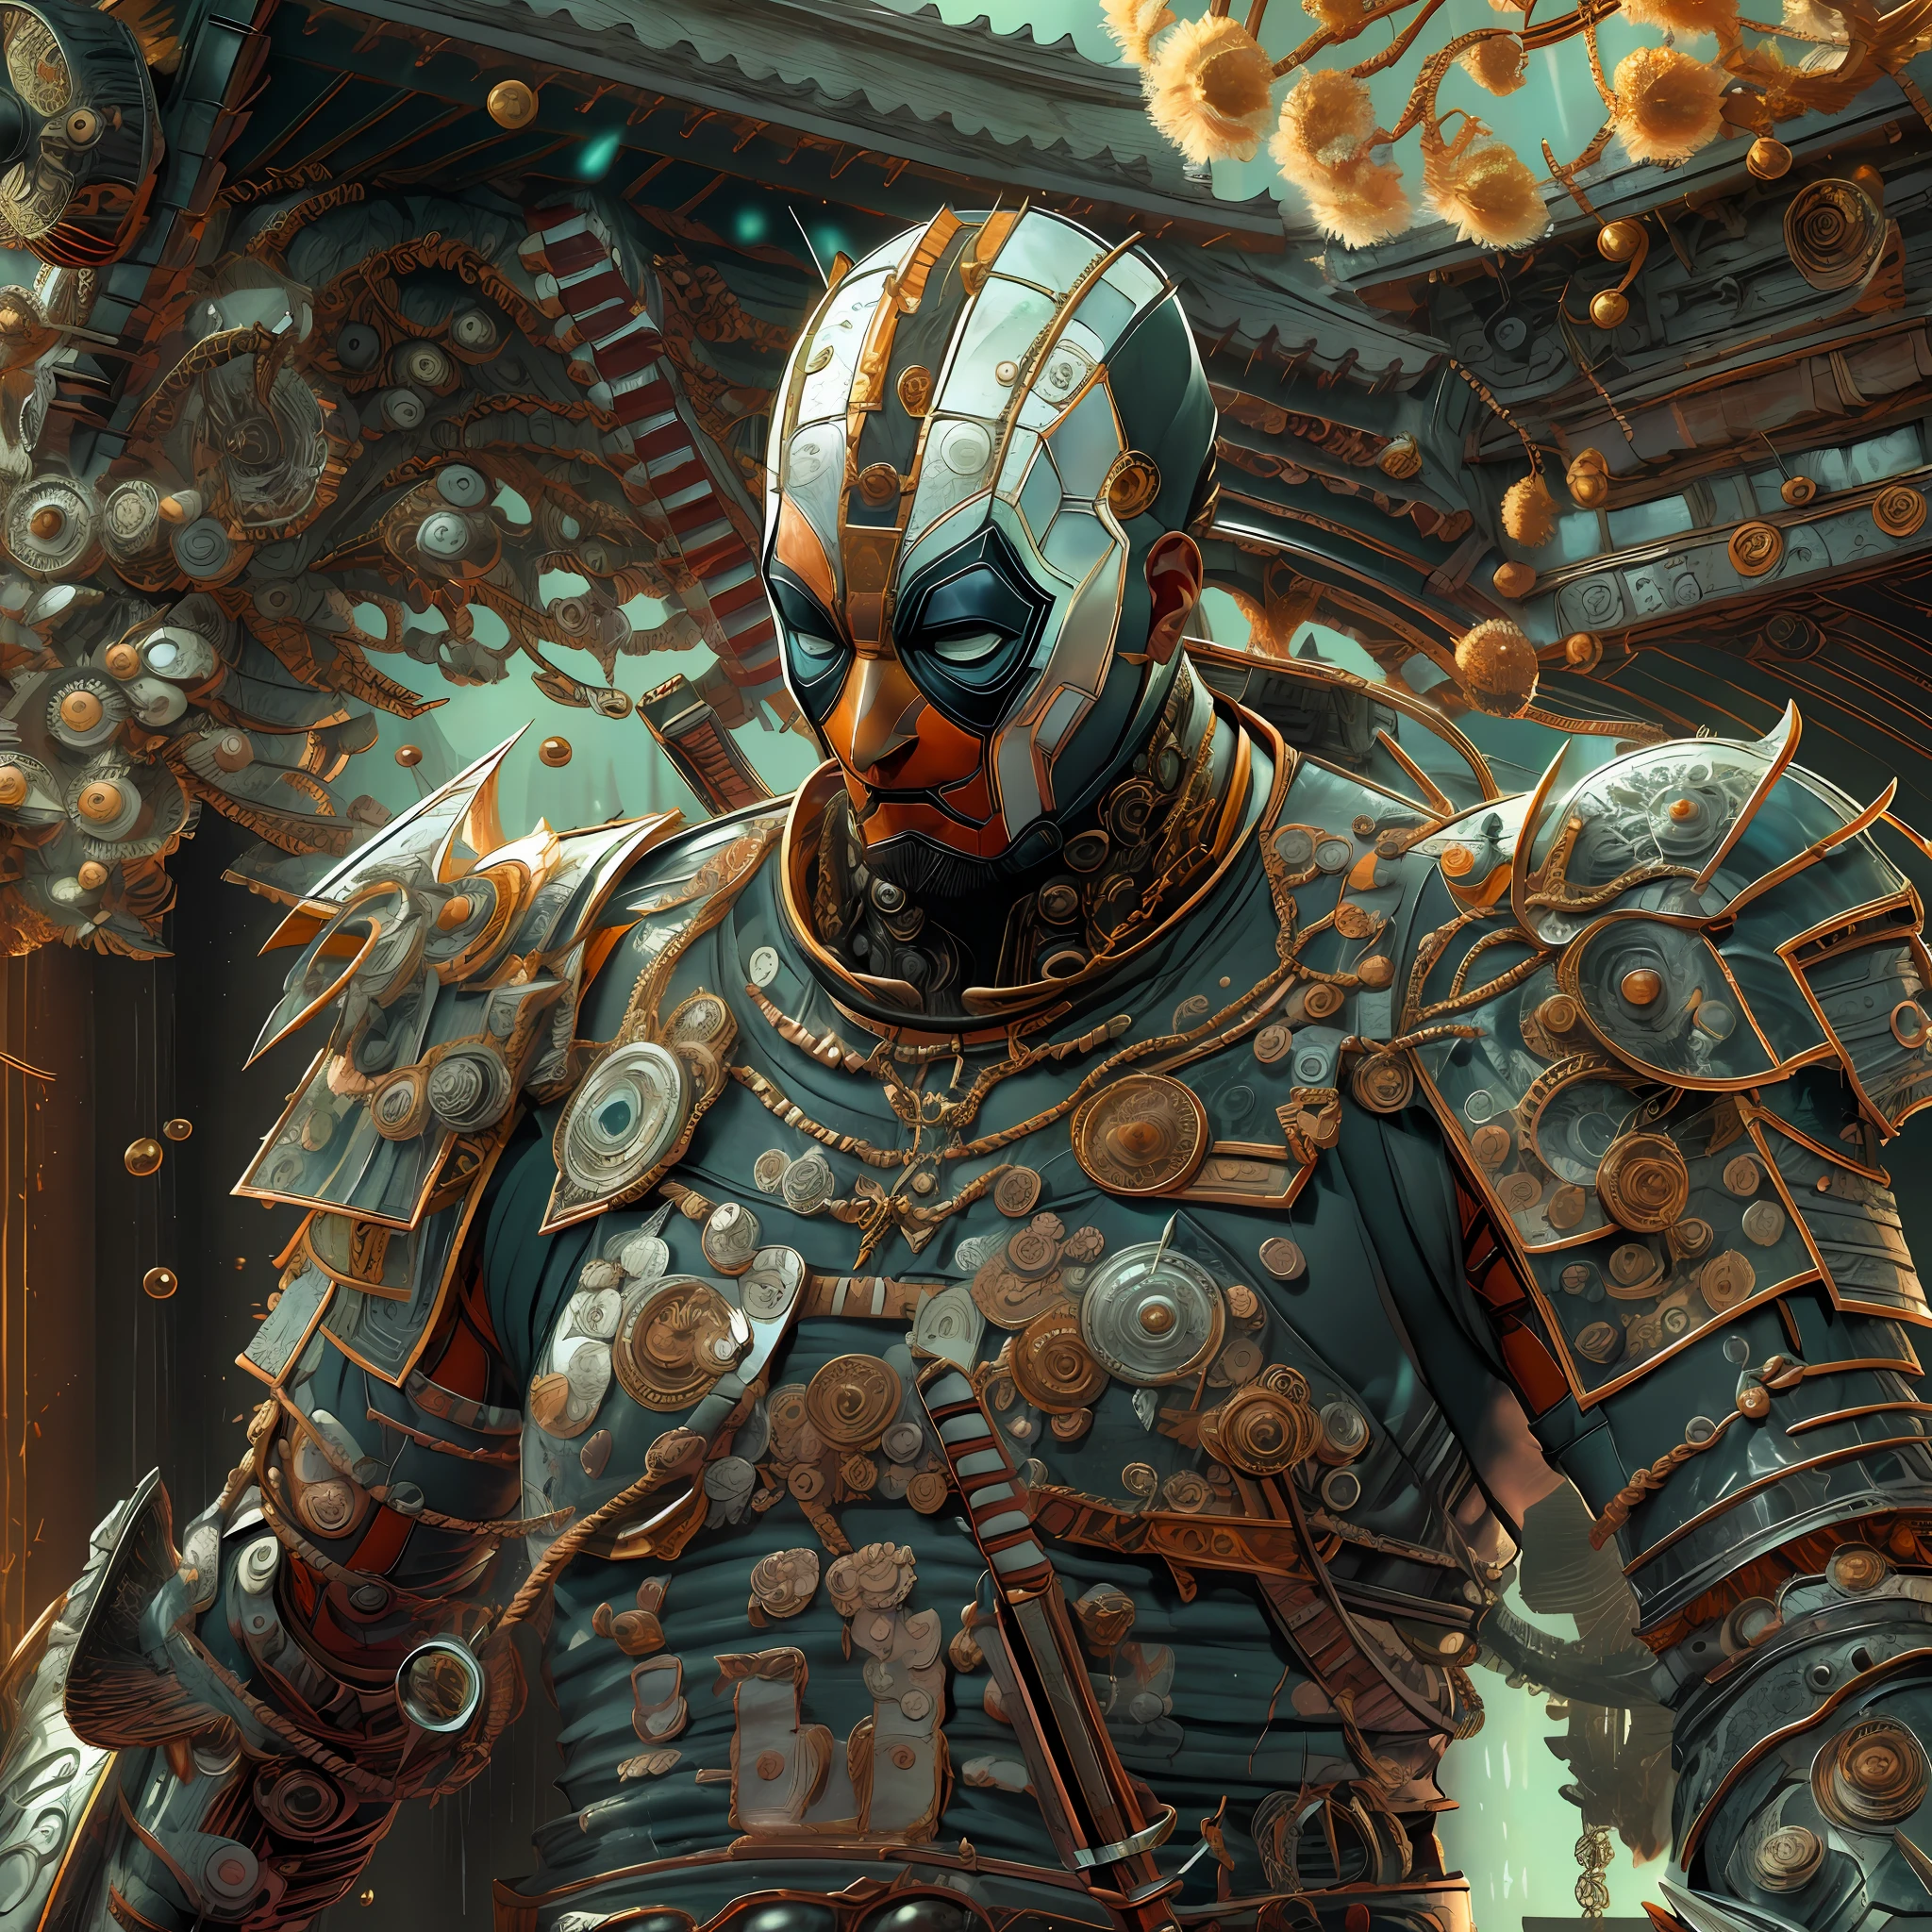 ((Best quality)), ((masterpiece)), (detailed: 1.4), (magnificent meticulous detail), deadpool (perfect anatomy:.5) as a samurai cyborg, robot, Japanese art relics, demonic detailed face, fighting action pose, white and orange mechanic ornate body, futuristic robe, ornate long skirt armor, perfect proportion, full body, moonlight lighting up the area, standing in the ancient Roma city, rainy sky, inner body glowing, photorealistic art, high detail, 3D rendering, cinematic scene, daylight, I can't believe how perfect this is image is, master detail, Musashibou BENKEI.